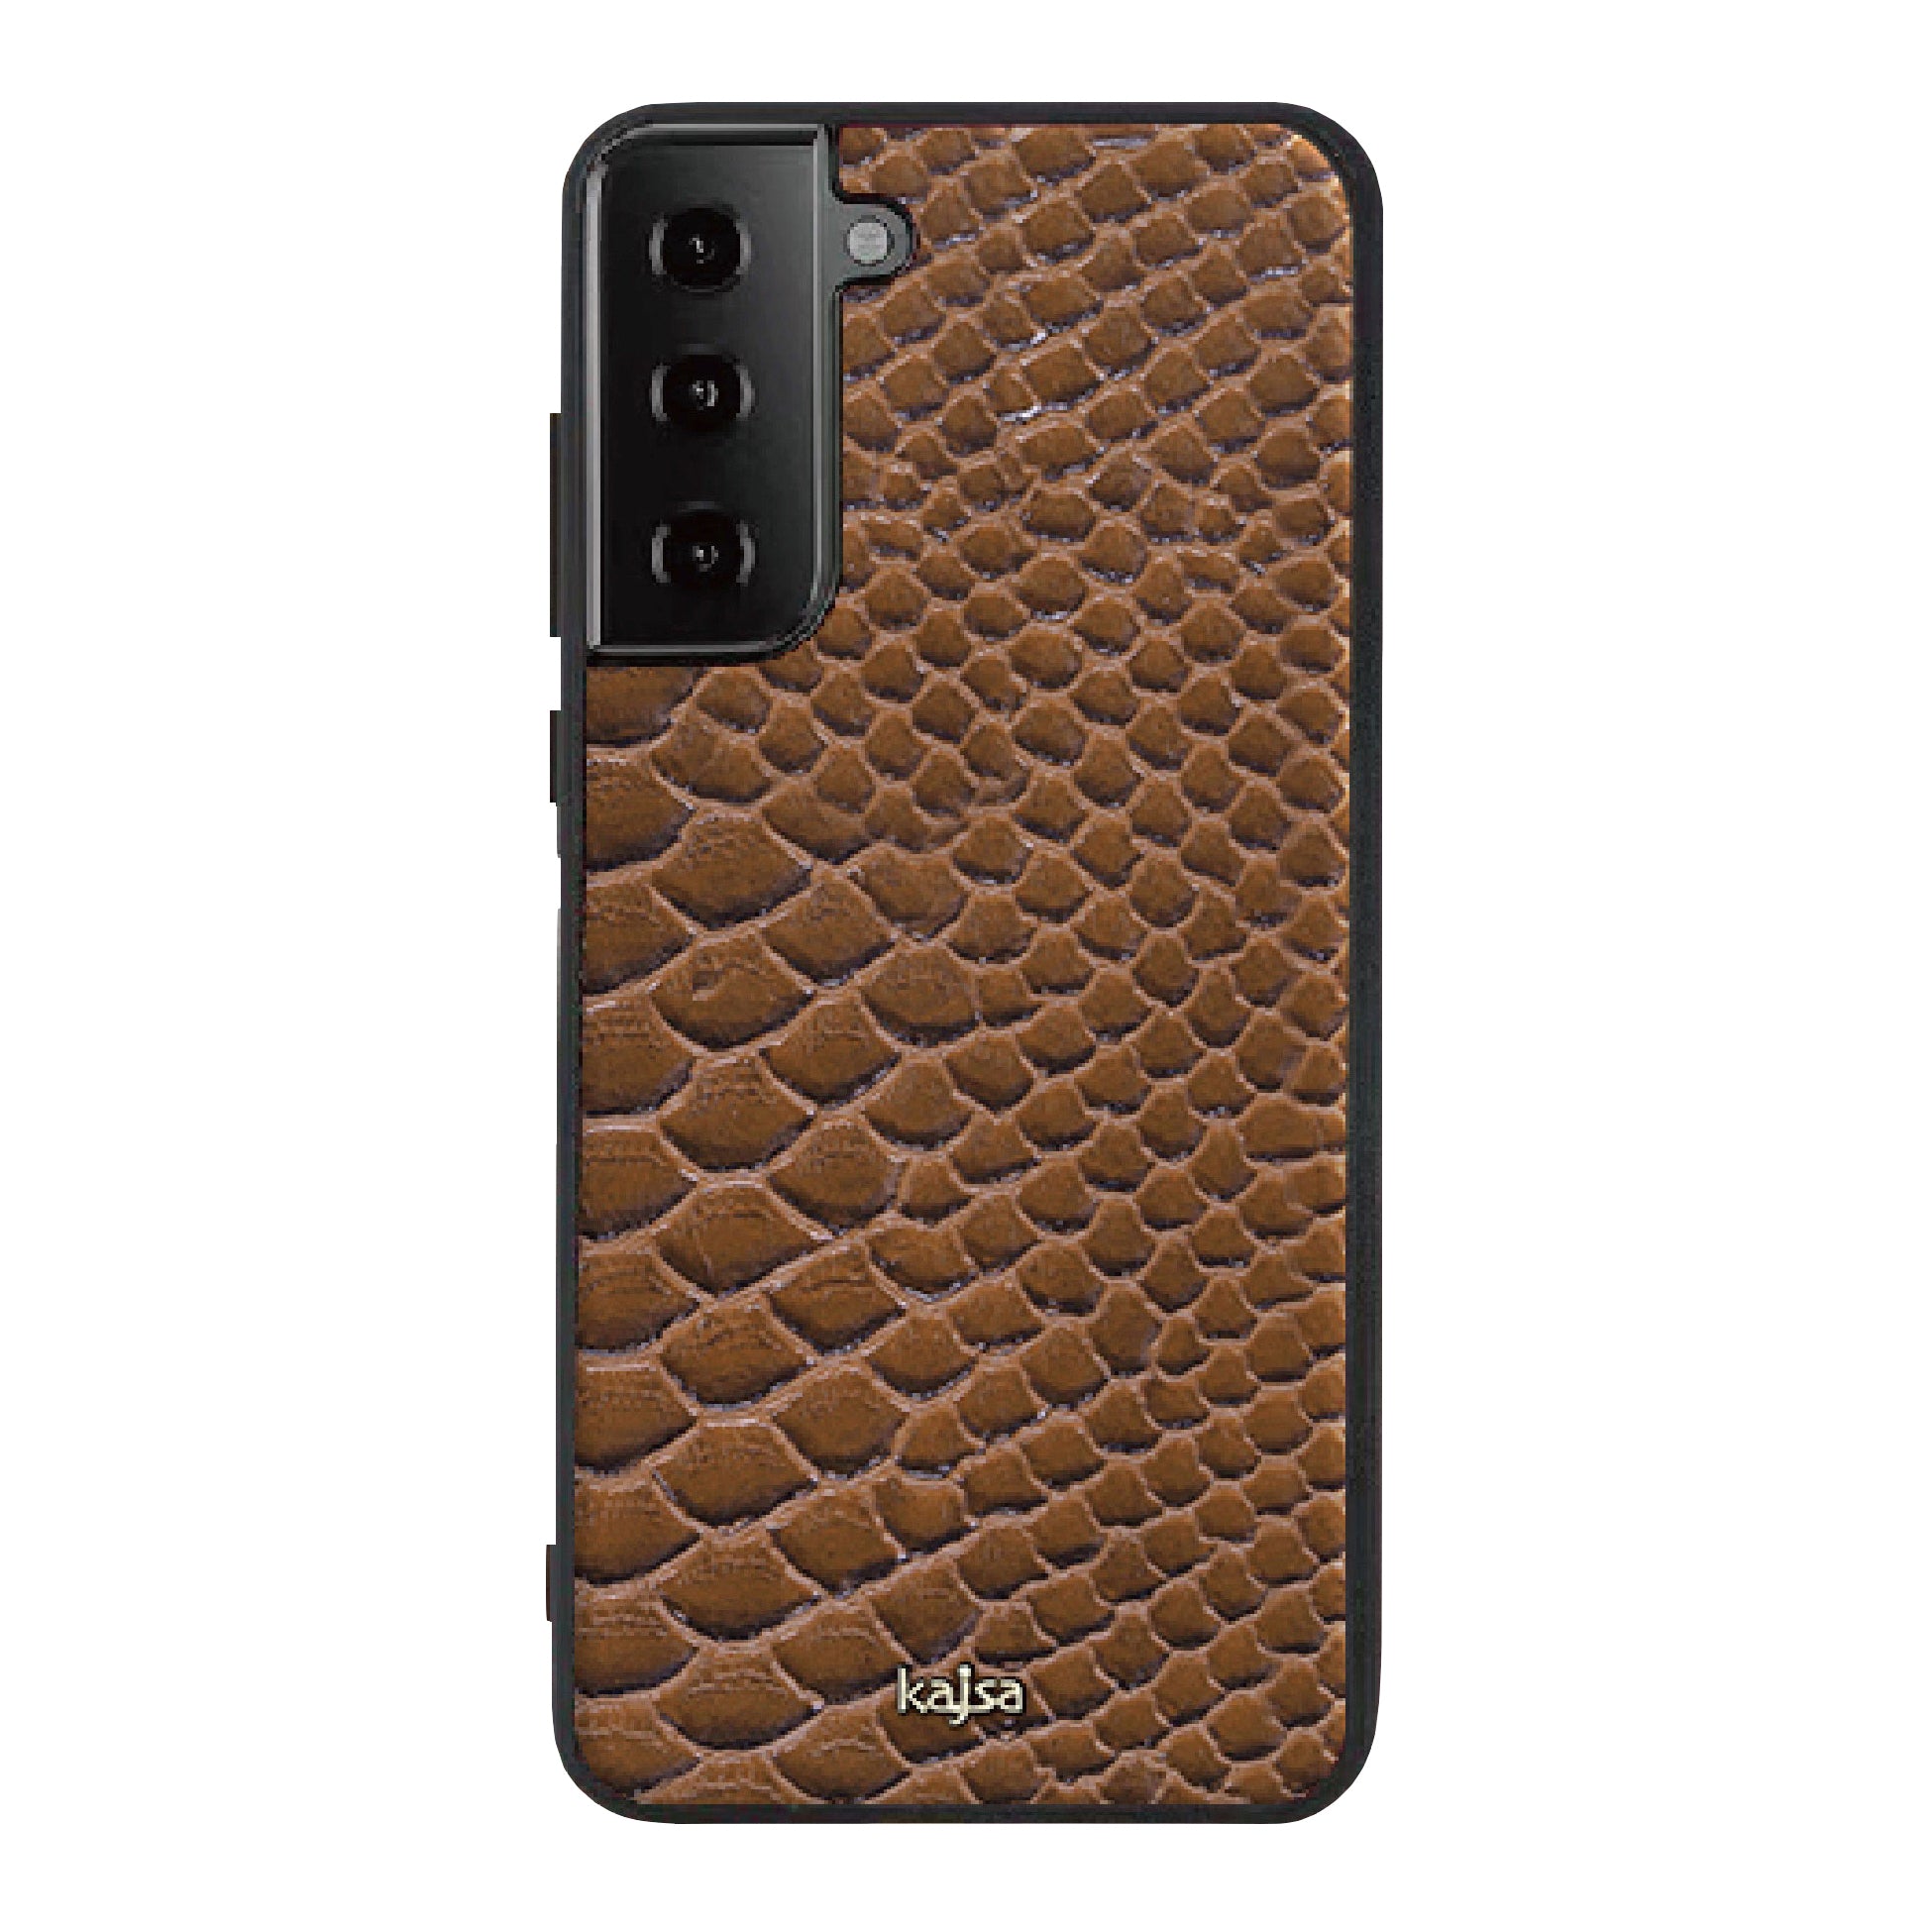 Glamorous Collection - Snake Pattern Back Case for Samsung Galaxy S21/S21+/S21 Ultra-Phone Case- phone case - phone cases- phone cover- iphone cover- iphone case- iphone cases- leather case- leather cases- DIYCASE - custom case - leather cover - hand strap case - croco pattern case - snake pattern case - carbon fiber phone case - phone case brand - unique phone case - high quality - phone case brand - protective case - buy phone case hong kong - online buy phone case - iphone‎手機殼 - 客製化手機殼 - samsung ‎手機殼 - 香